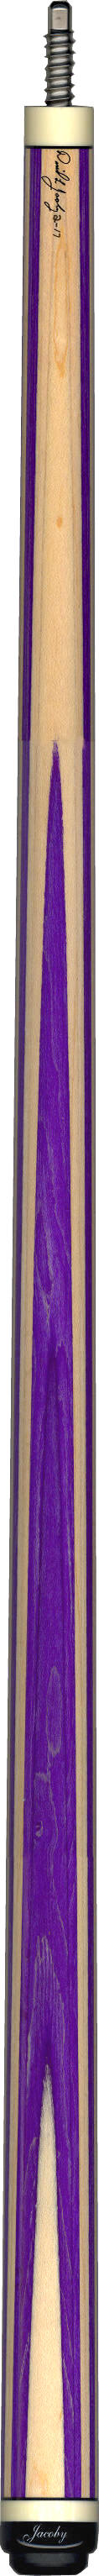 Jacoby 020117 Pool Cue